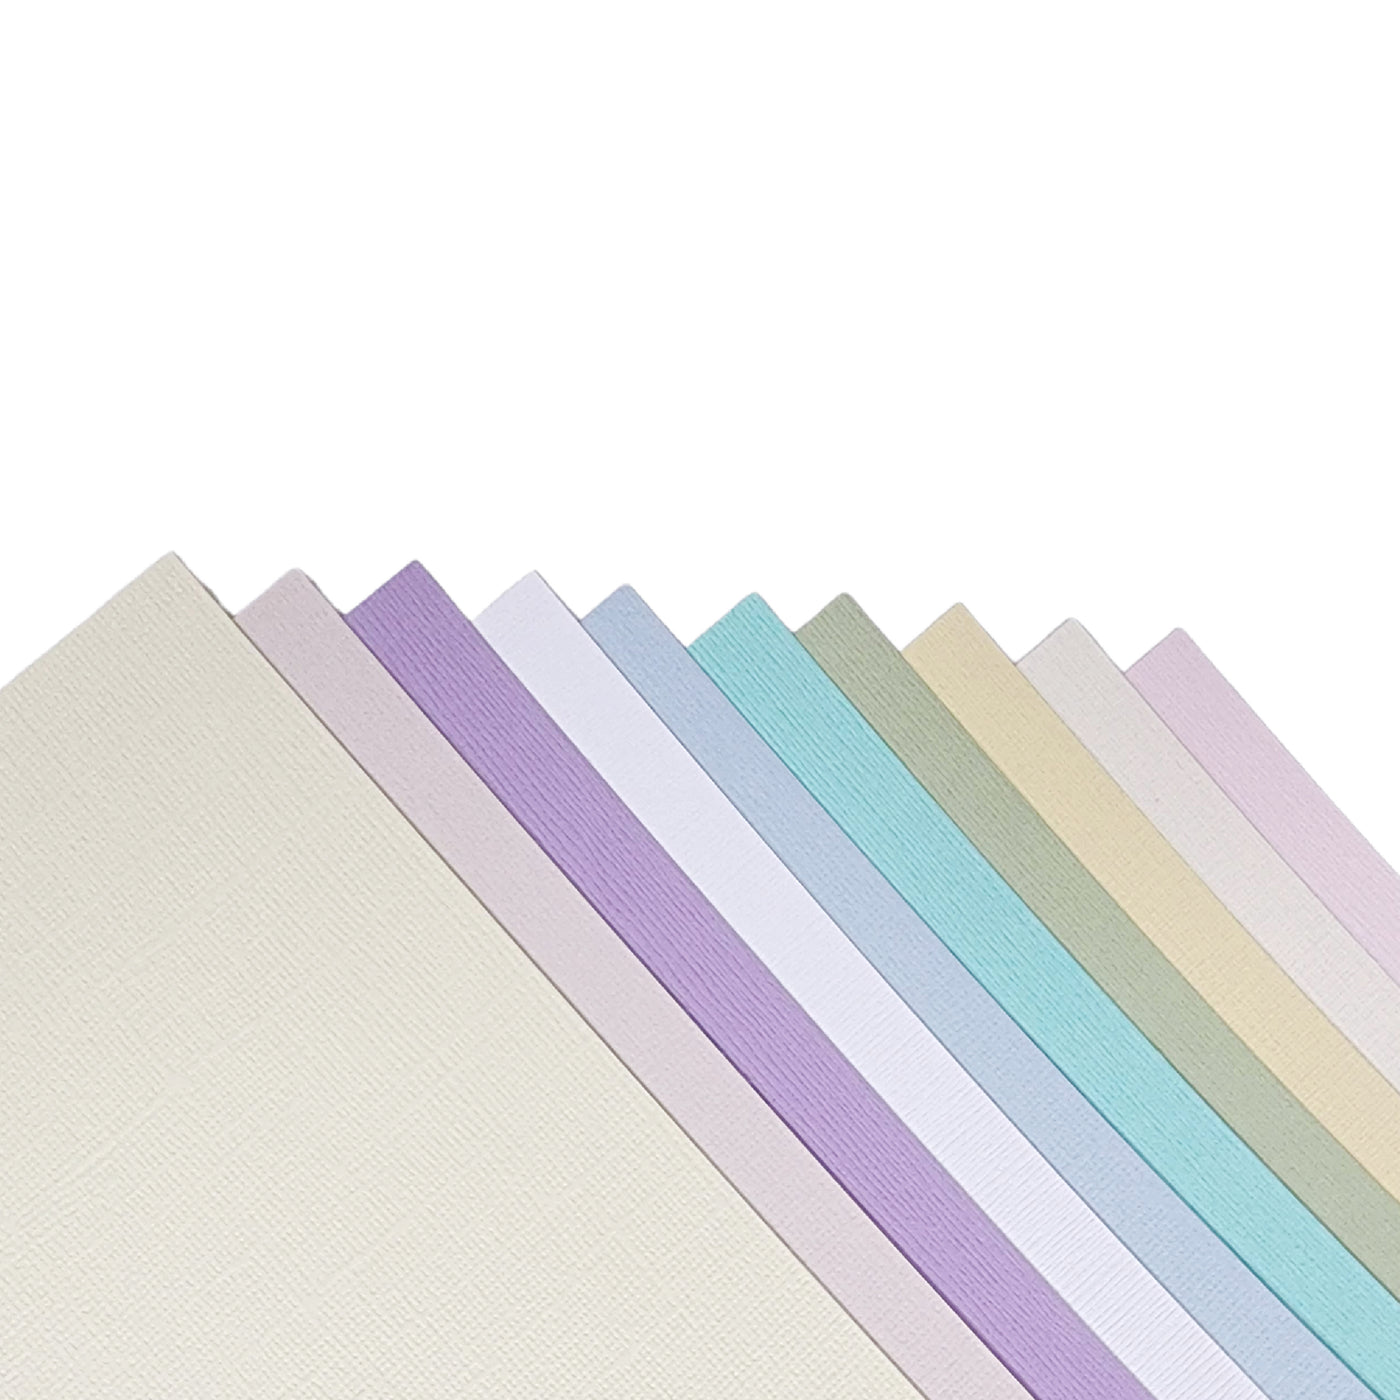 SOFT PASTELS CARDSTOCK VARIETY PACK - 10 Sheets - Bazzill 12x12 Cardstock